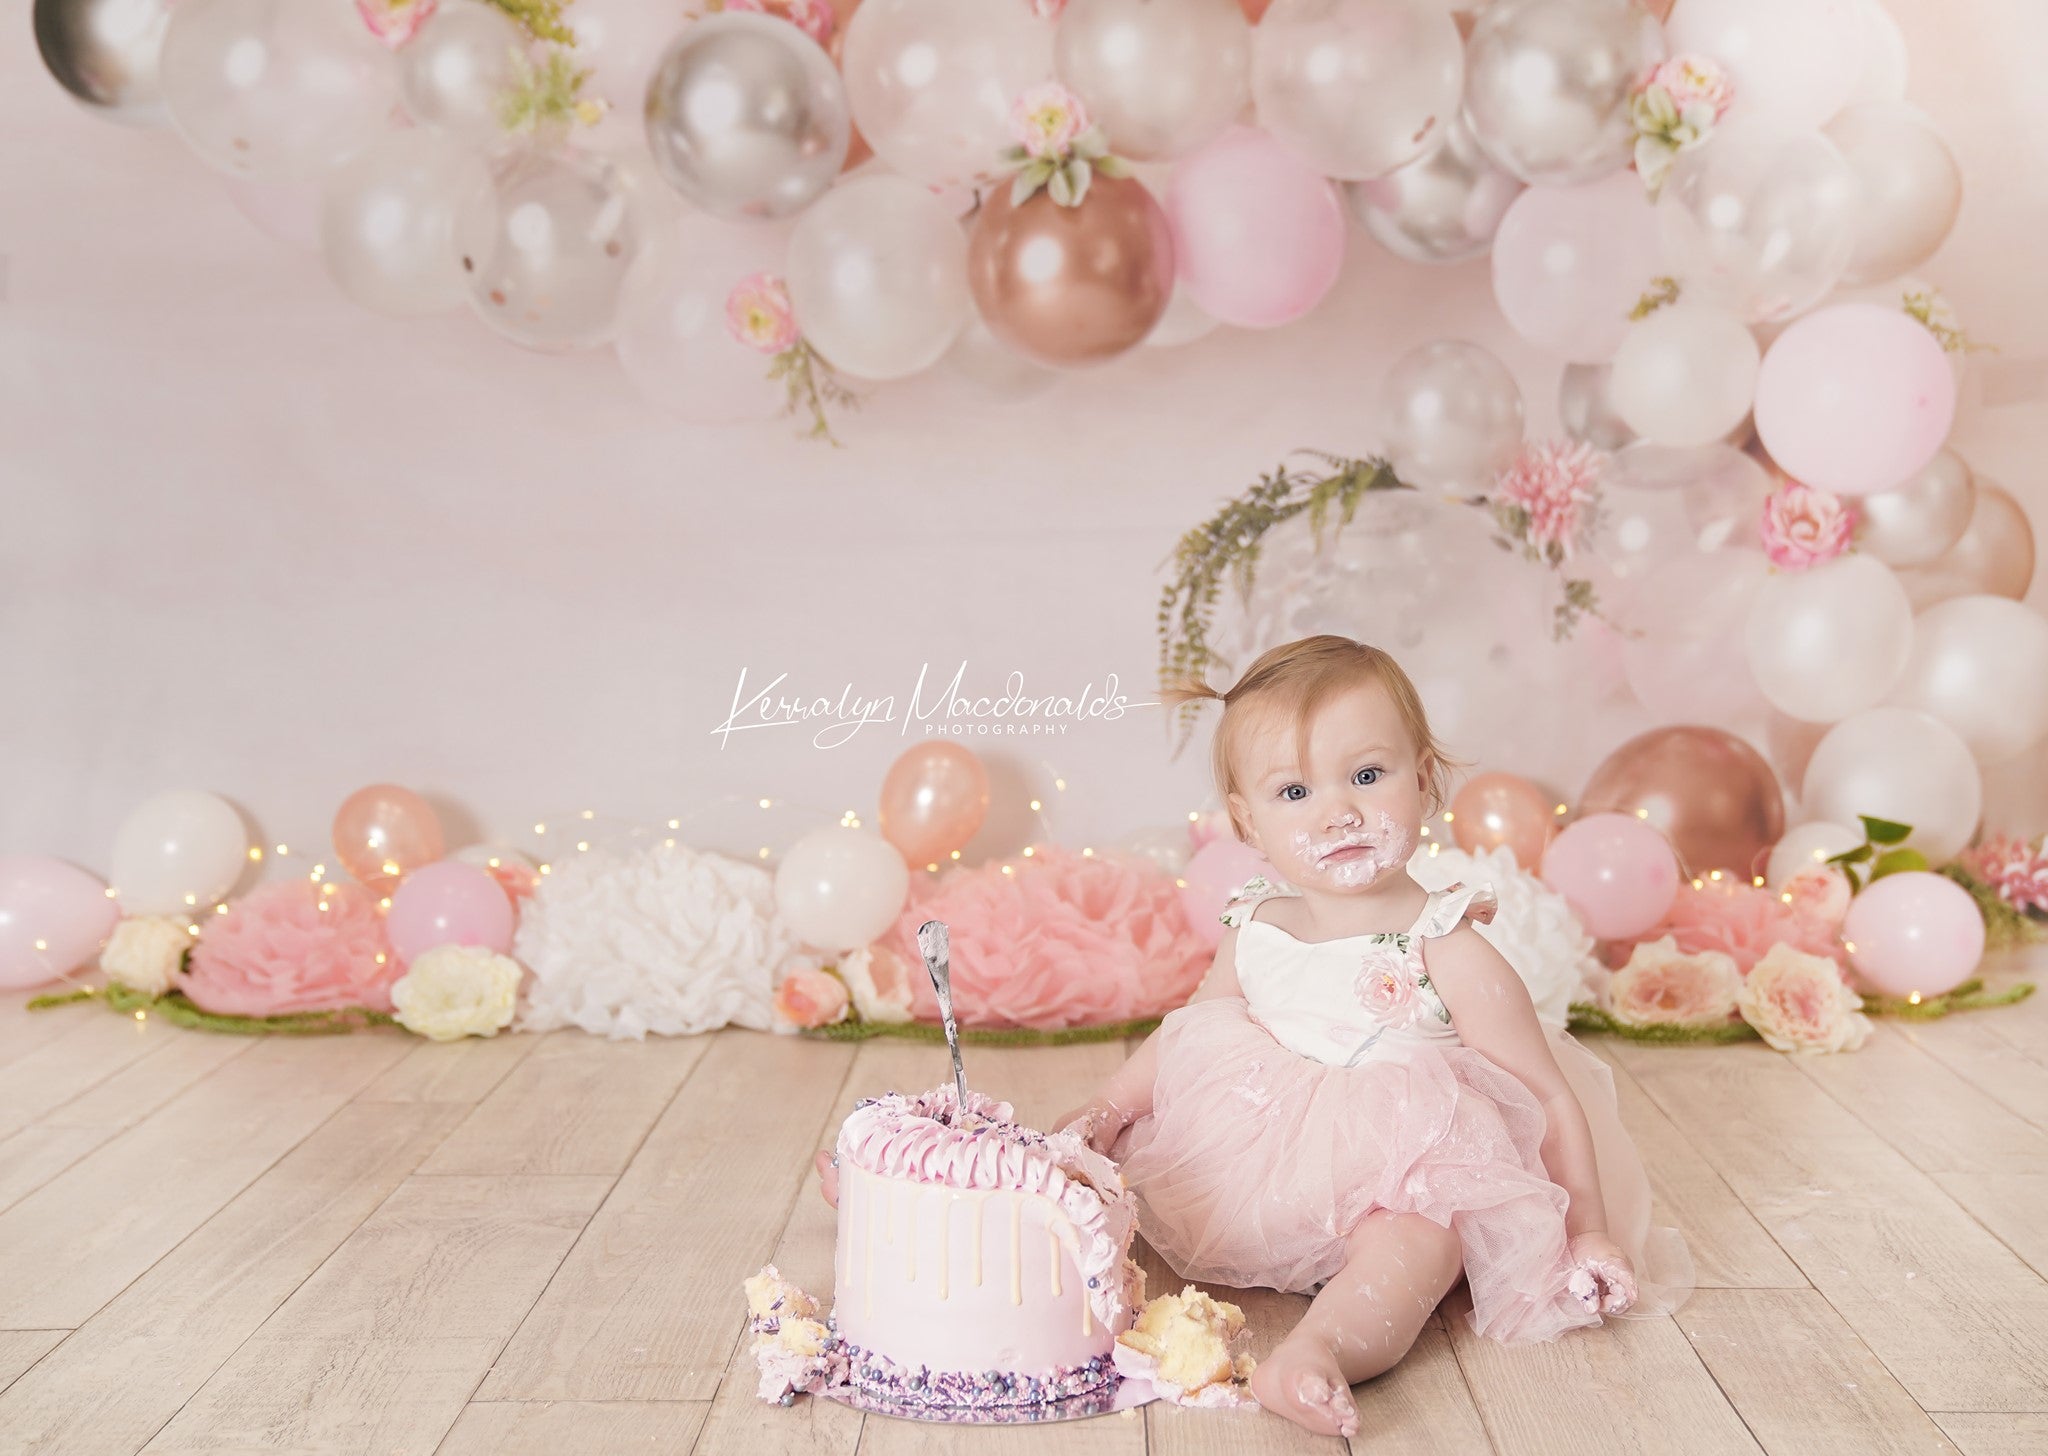 Kate Pink White Rose Gold Balloon Arch Backdrop Designed by Mandy Ringe Photography -UK